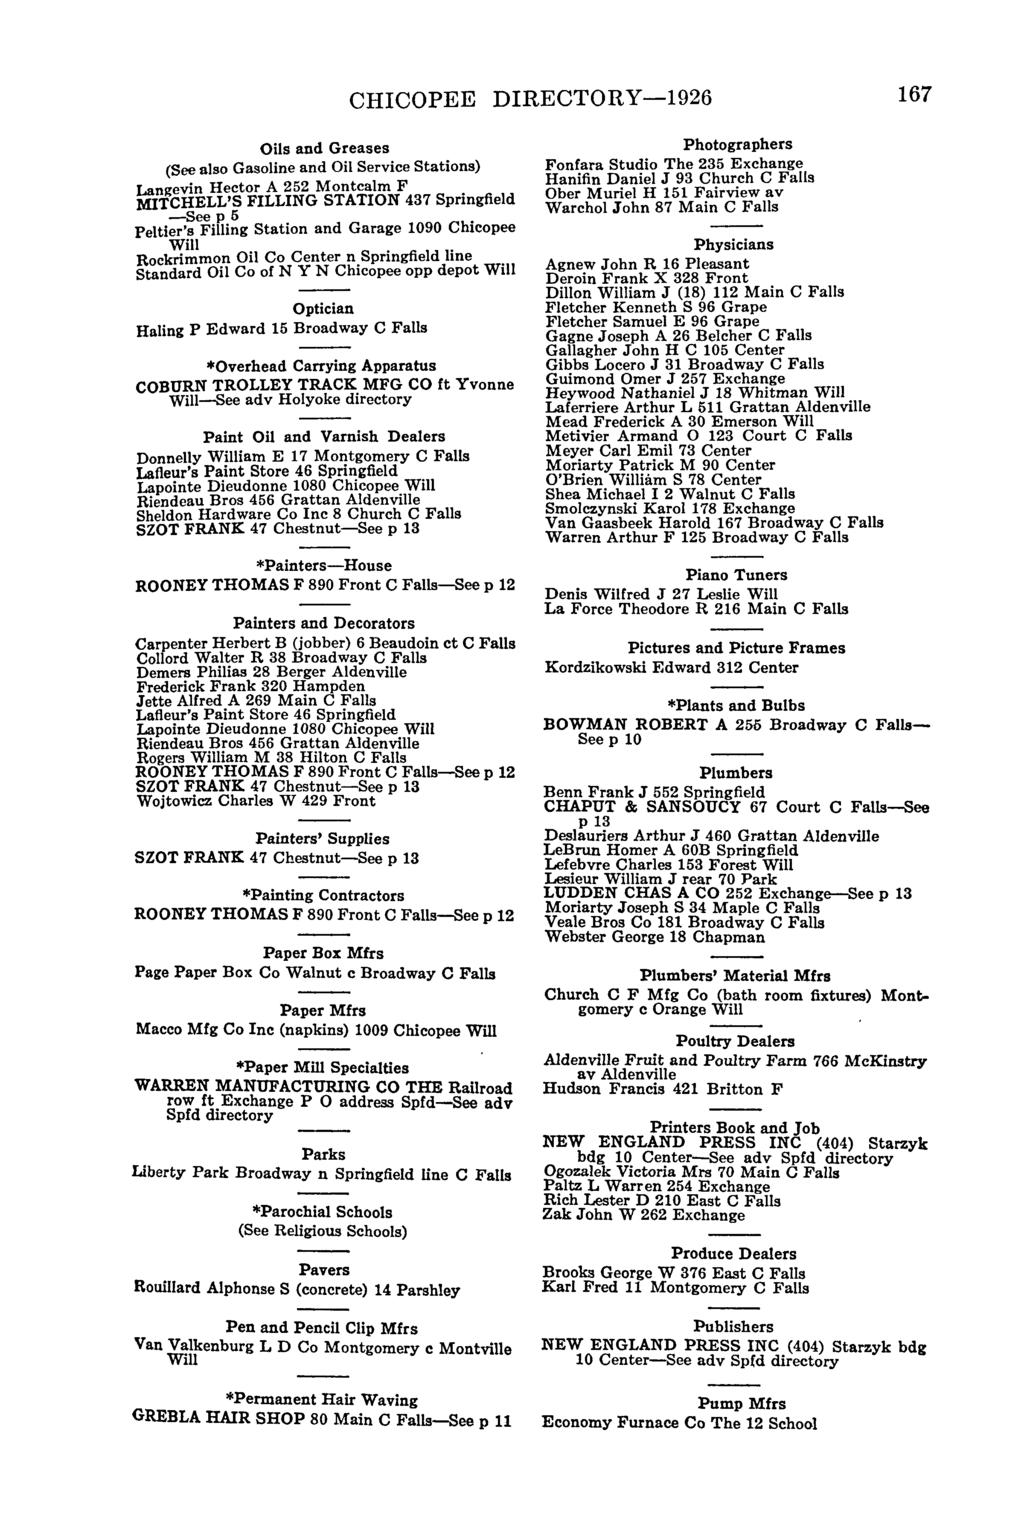 CHICOPEE DIRECTORY-1926 167 Oils and Greases (See also Gasoline and Oil Service Stations) Langevin Hector A 252 Montcalm F MITCHELL'S FILLING STATION 437 Springfield -See p 5 Peltier'S FiIIing